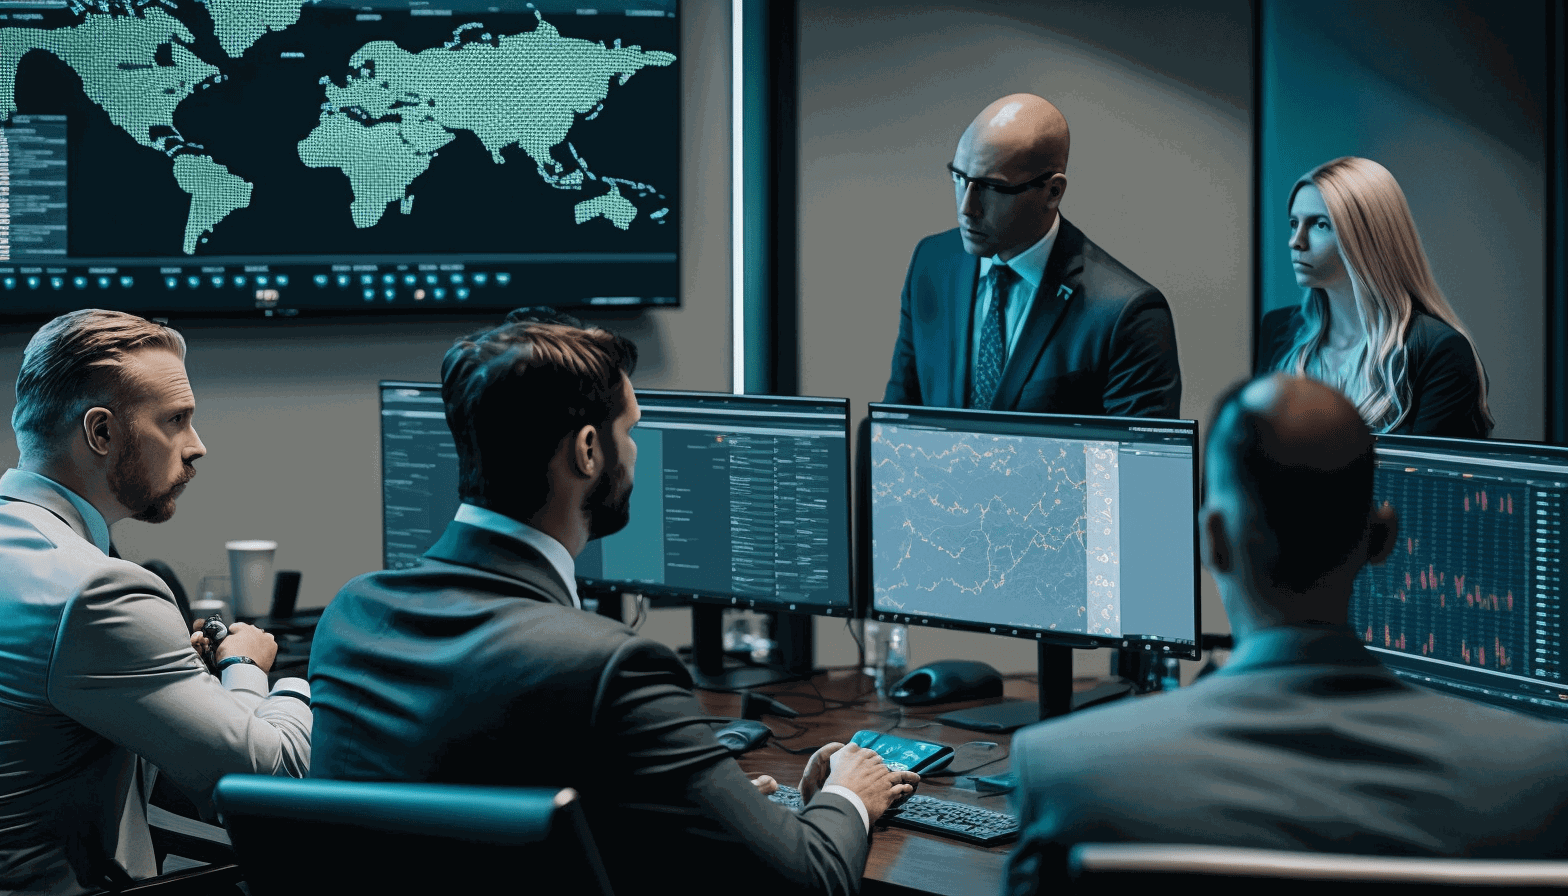 An image of a group of cybersecurity professionals in a boardroom, working together to ensure their organization's systems and data are secure.